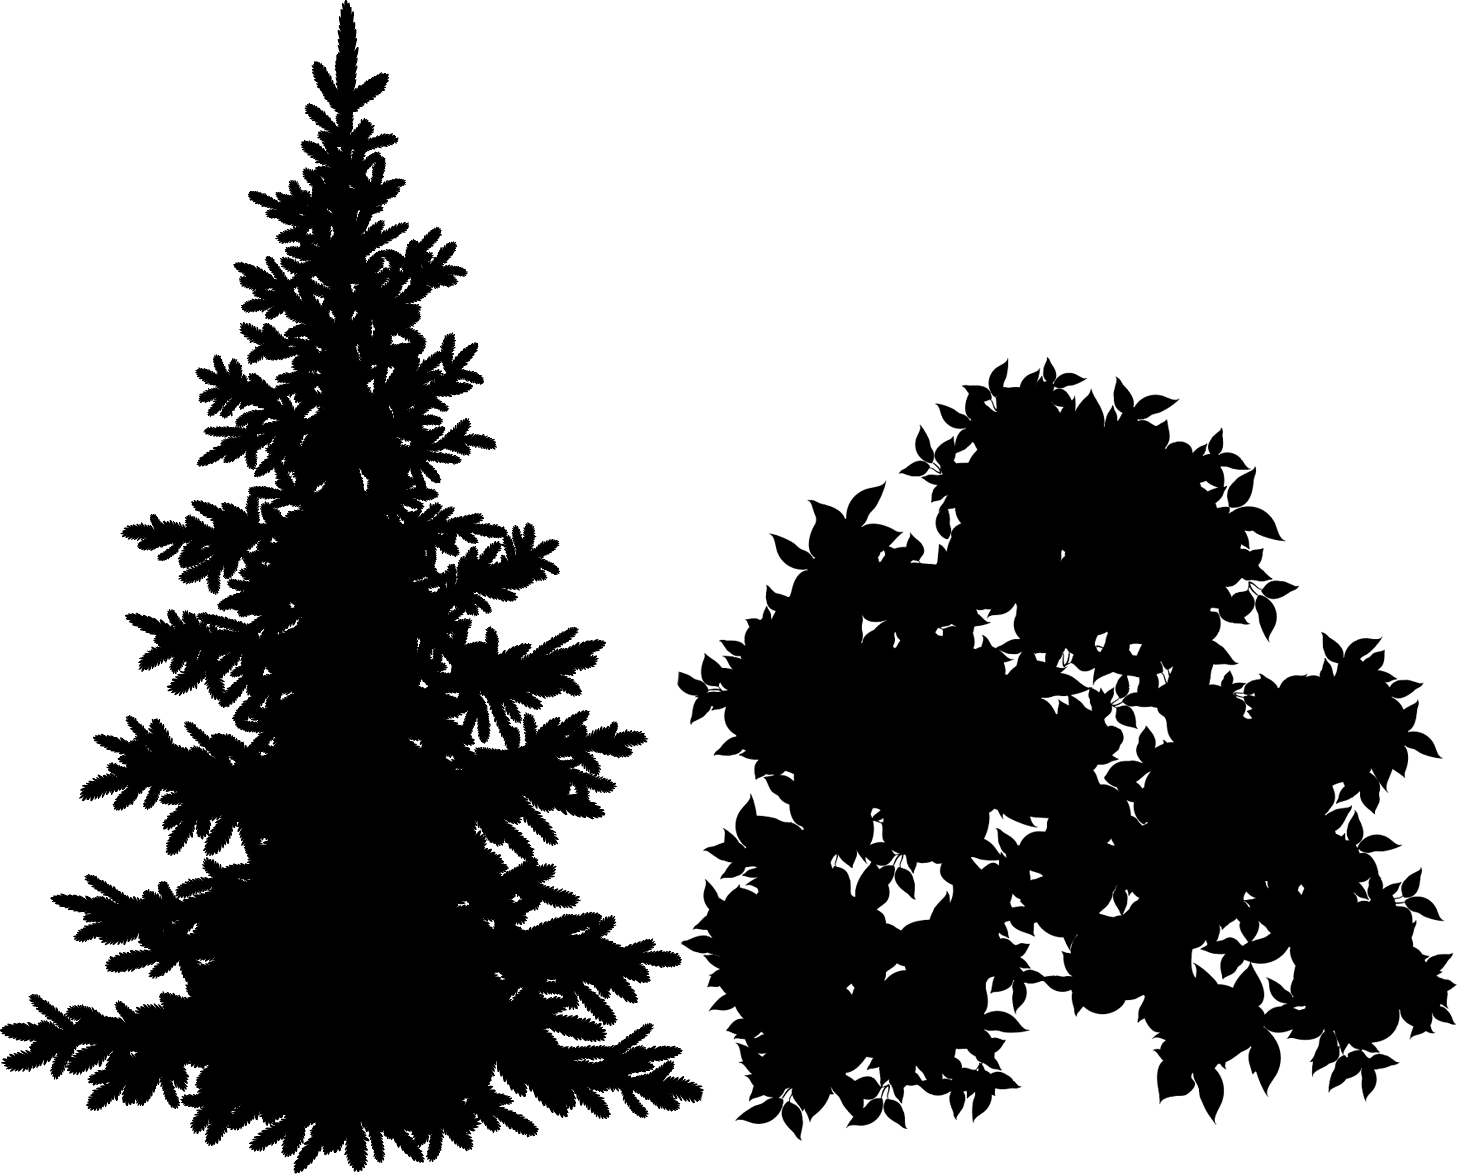 A couple of vector-based tree silhouettes from Dreamstime.com